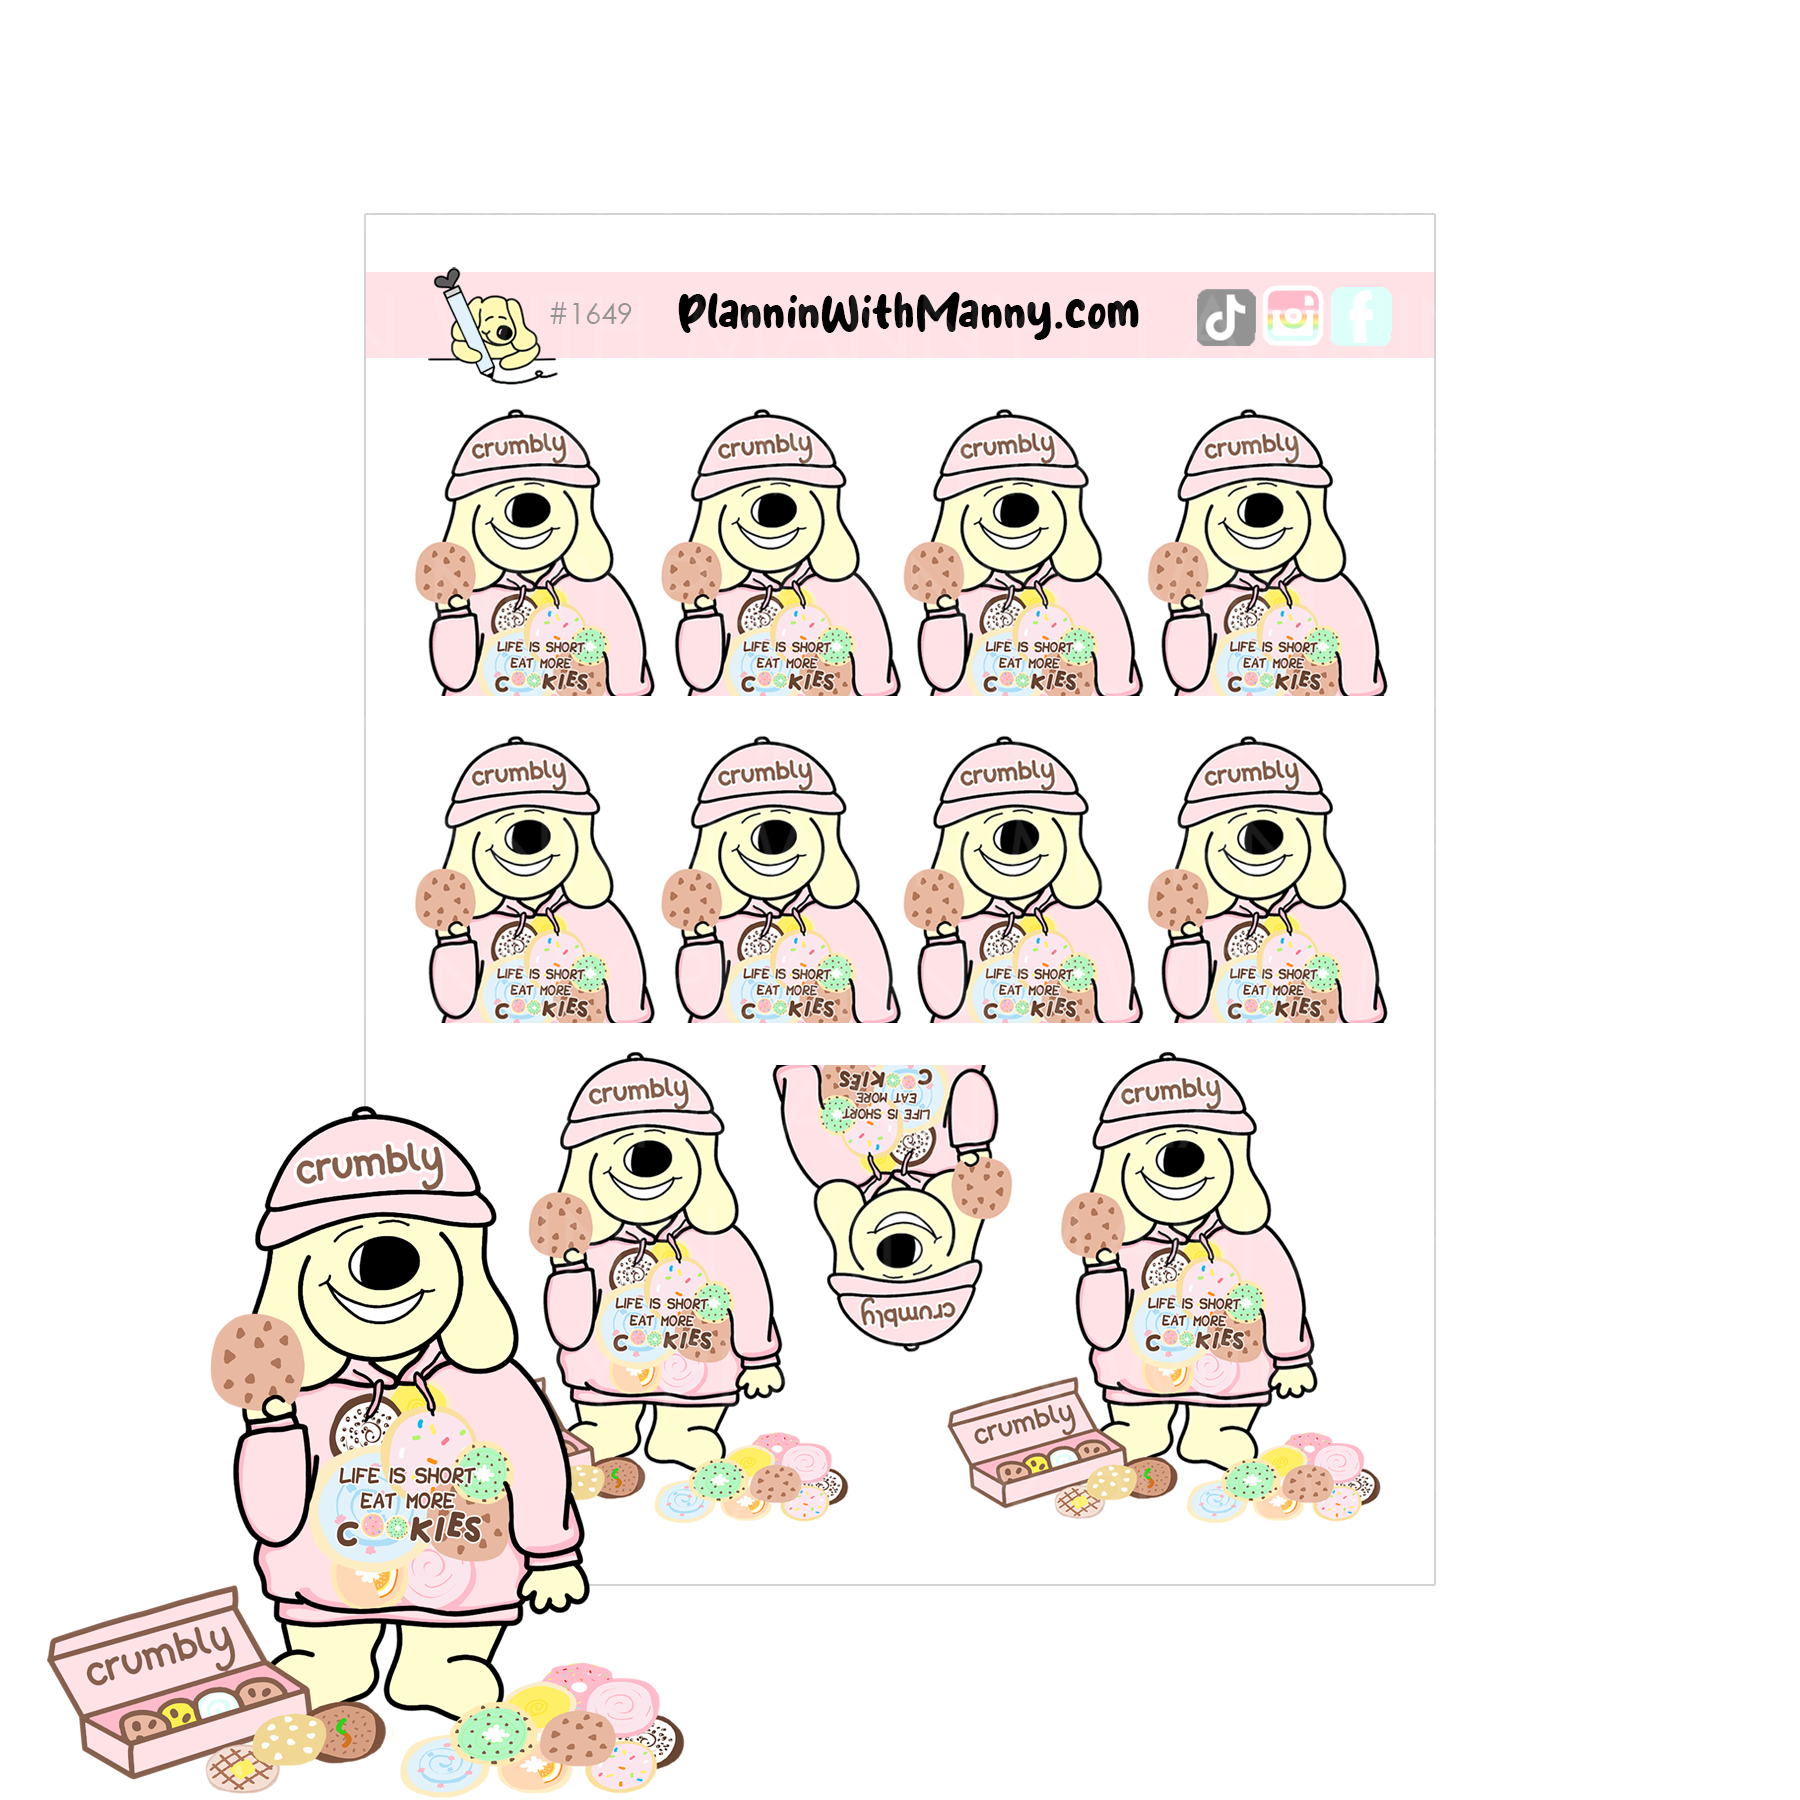 1649 Crumbly Cookie Manny Planner Stickers and Optional Diecut